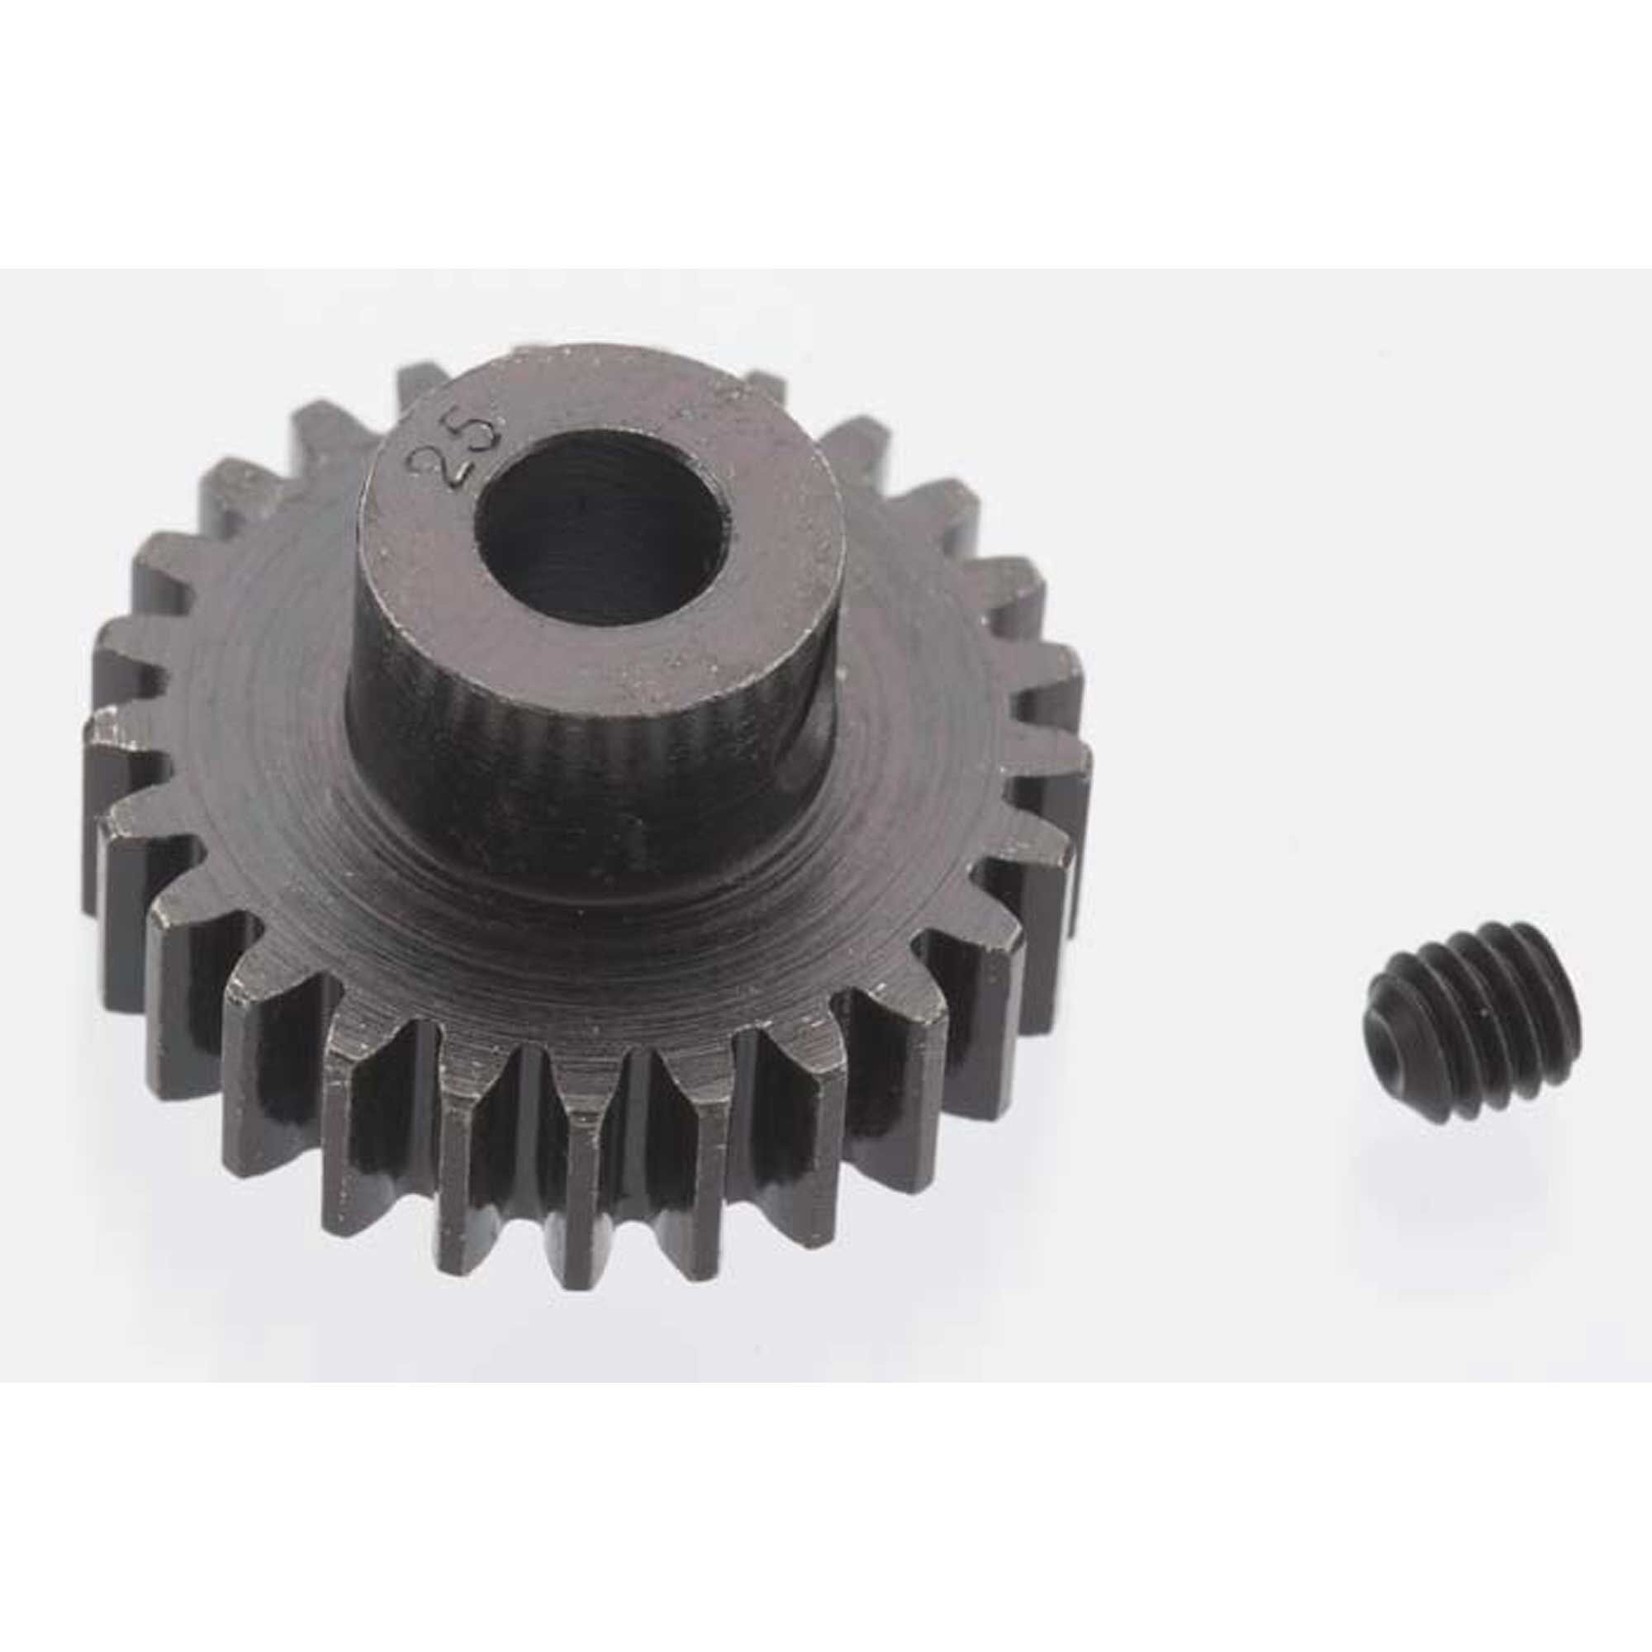 Robinson Racing Products (RRP) Extra Hard 25 Tooth Blackened Steel 32p Pinion, 5mm